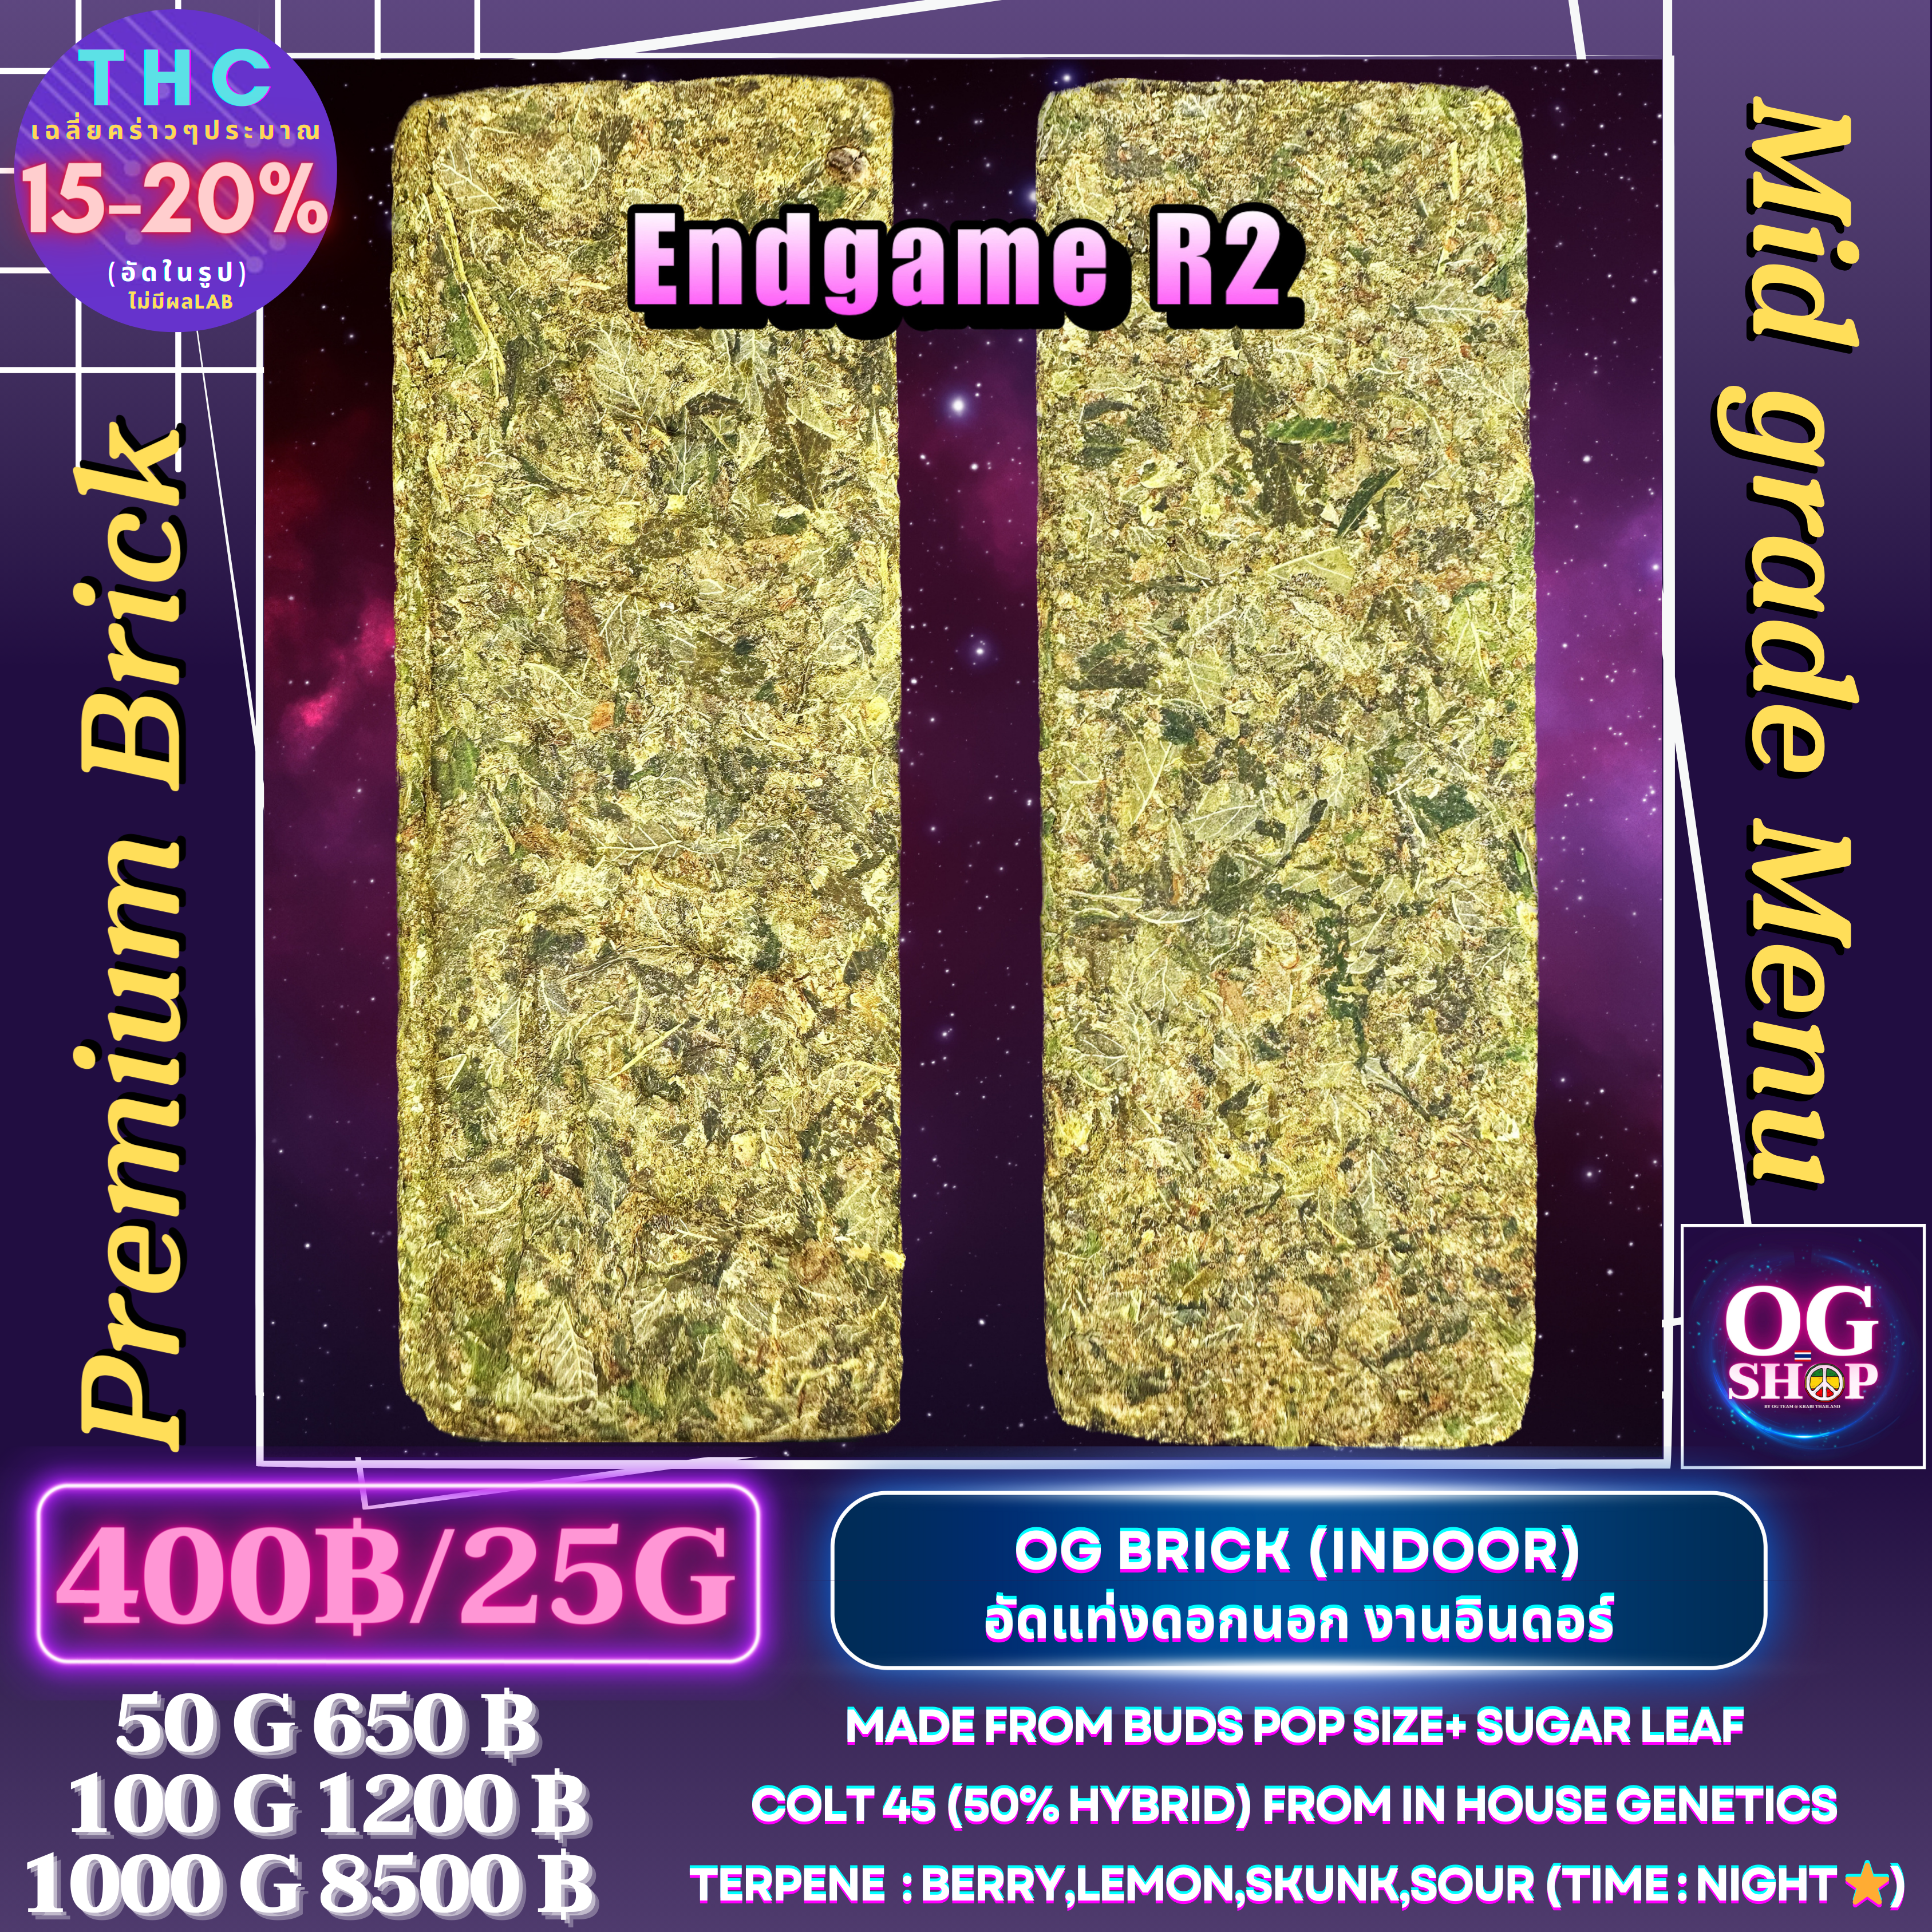 End Game R2 Strain Info / End Game R2 Weed By ETHOS Genetics